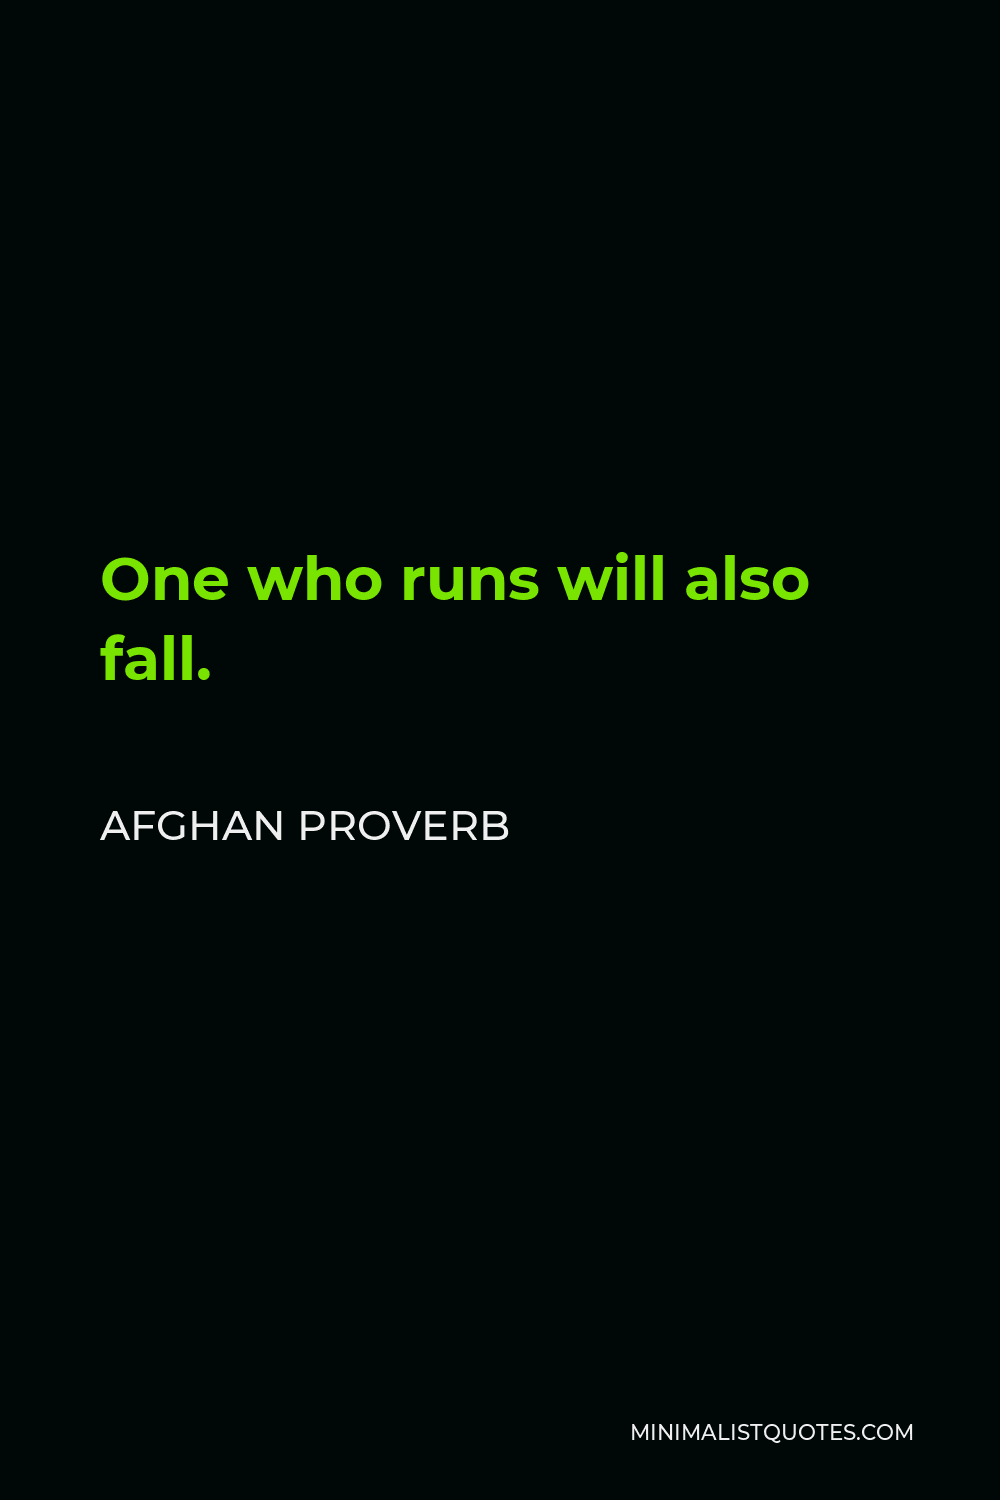 Afghan Proverb Quote - One who runs will also fall.